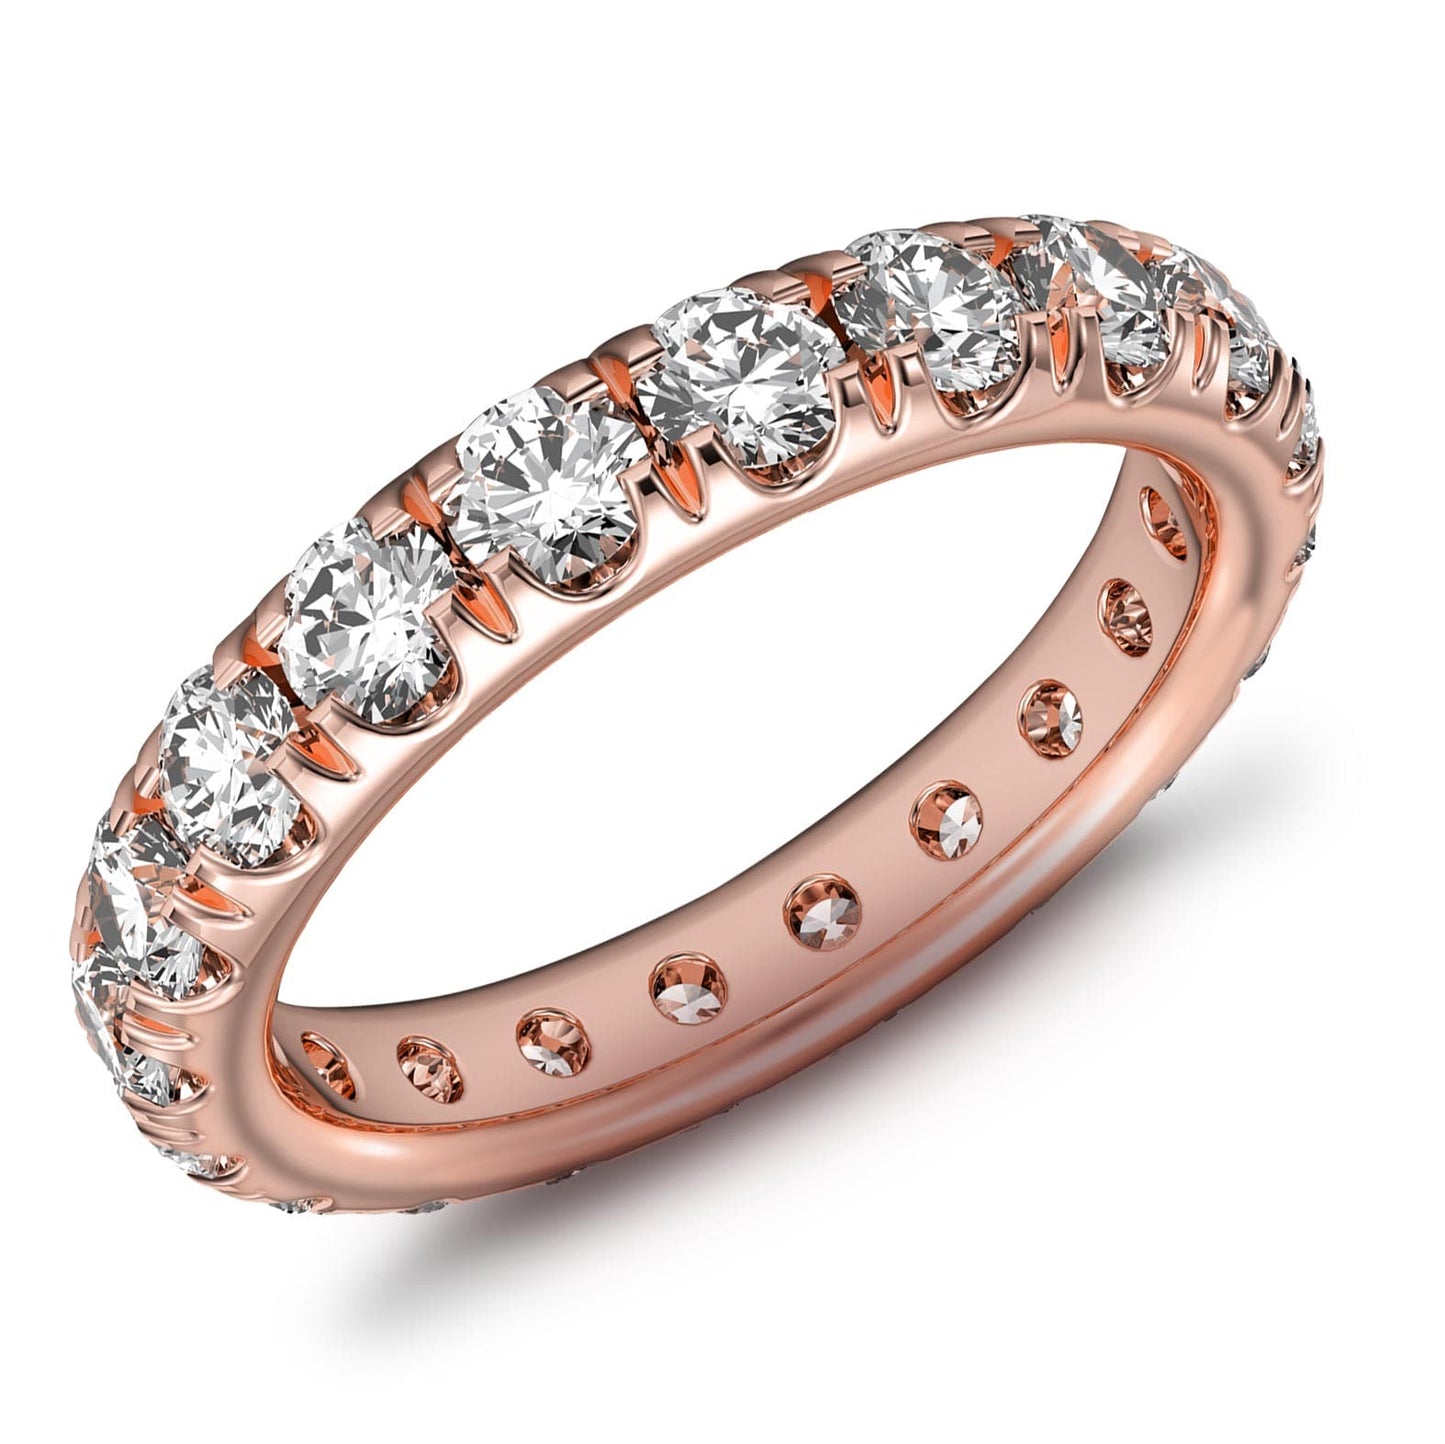 2ct French Pave Diamond Eternity Ring in 14k Gold